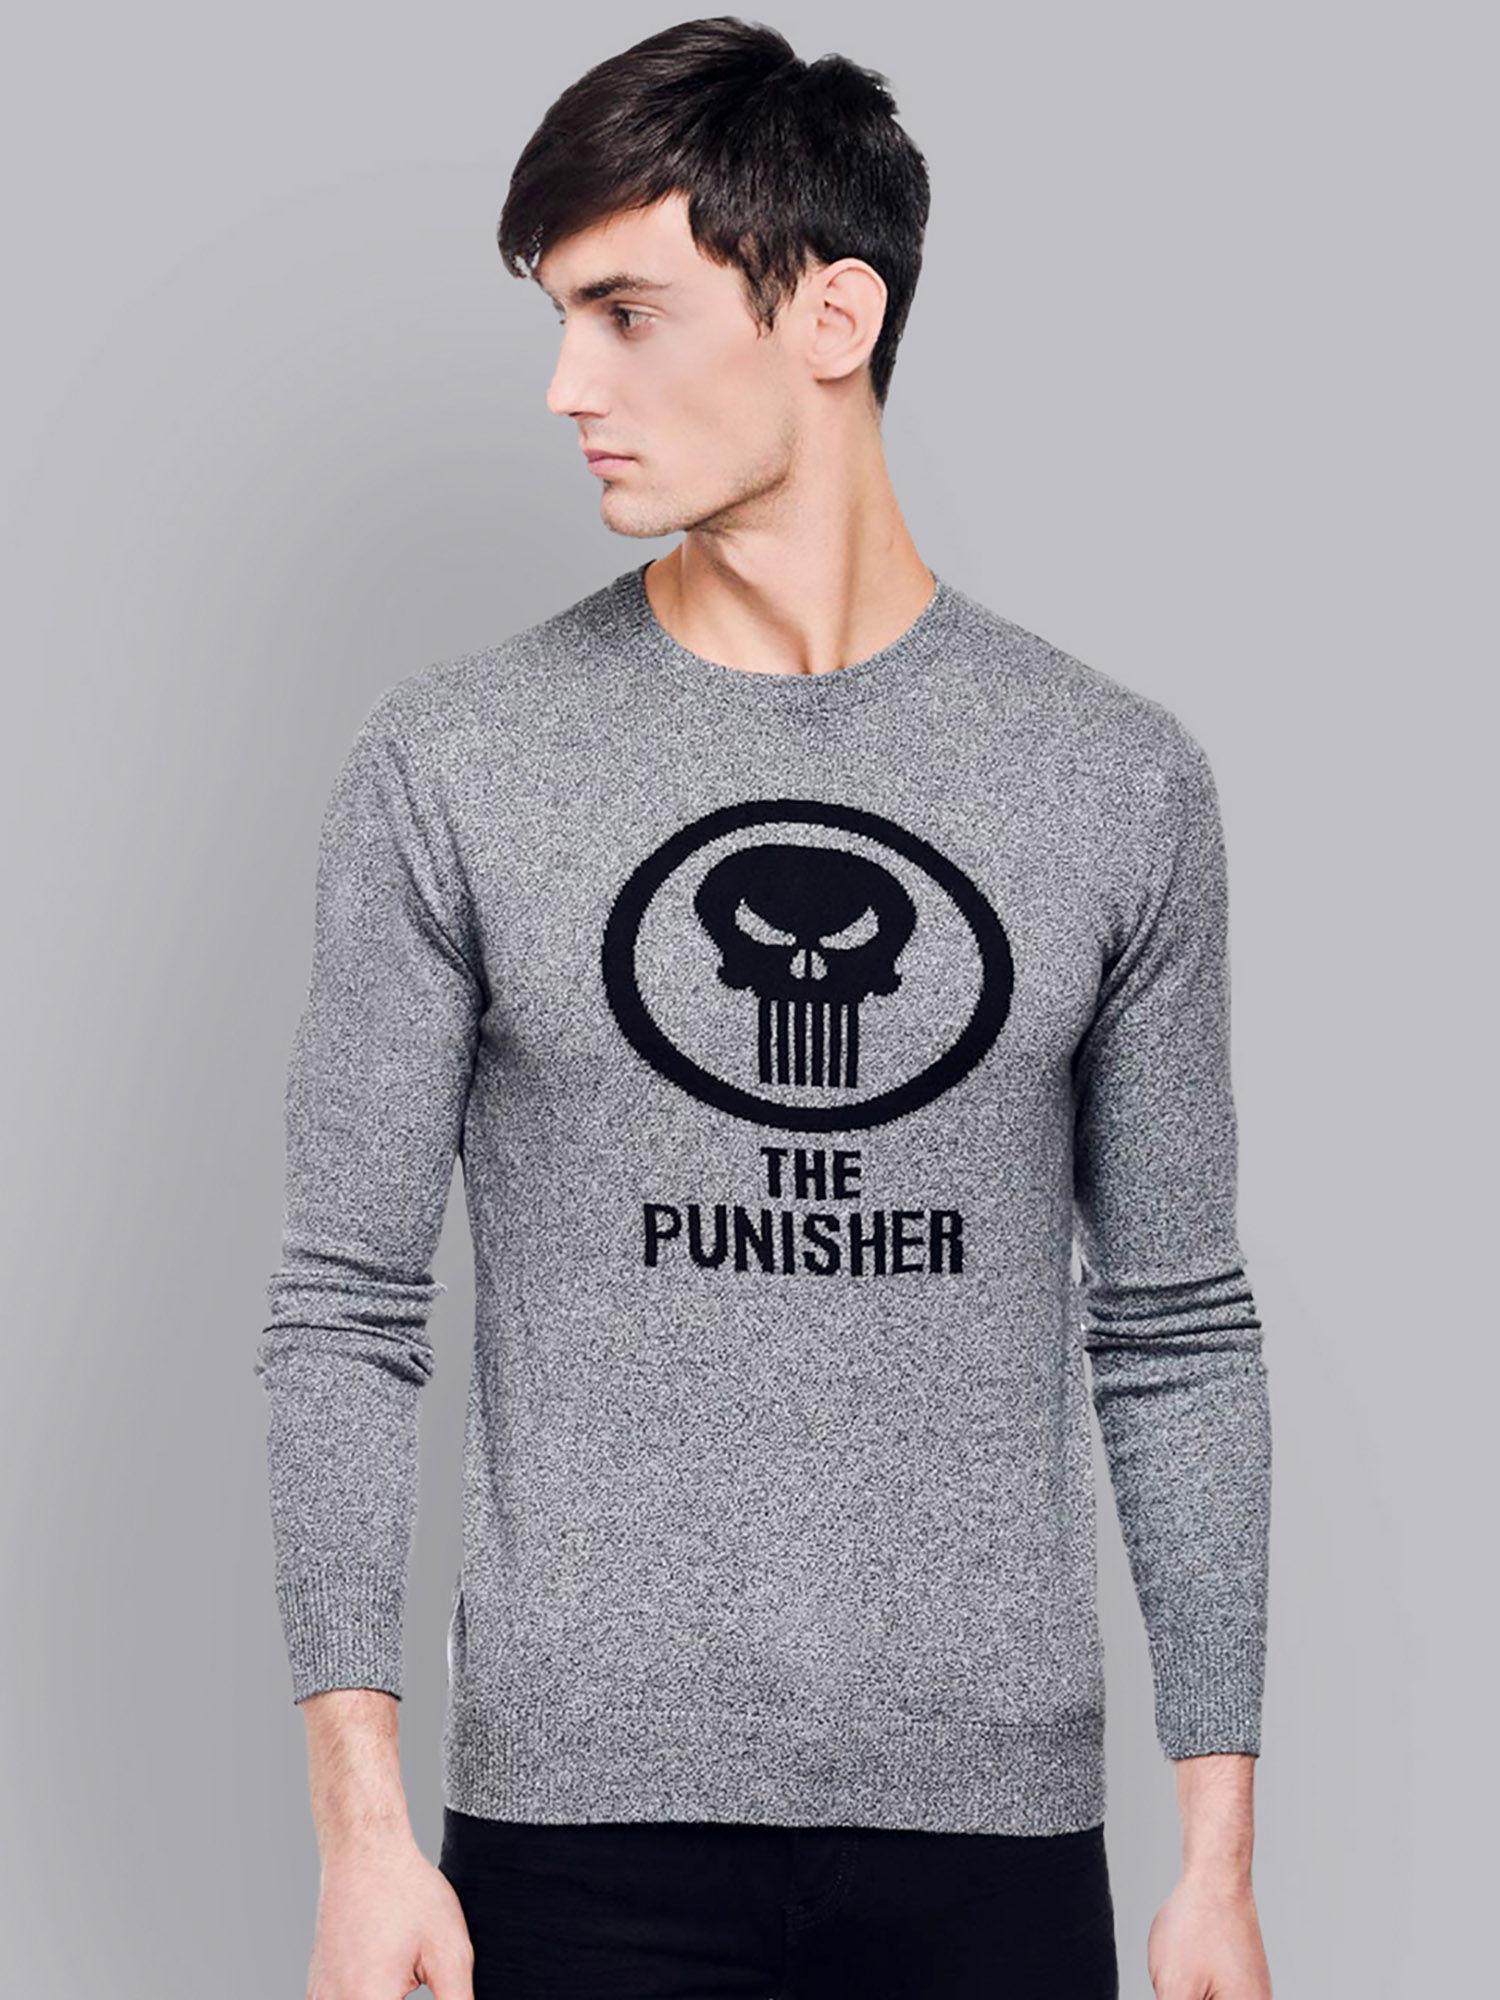 marvel comics featured grey sweater for men